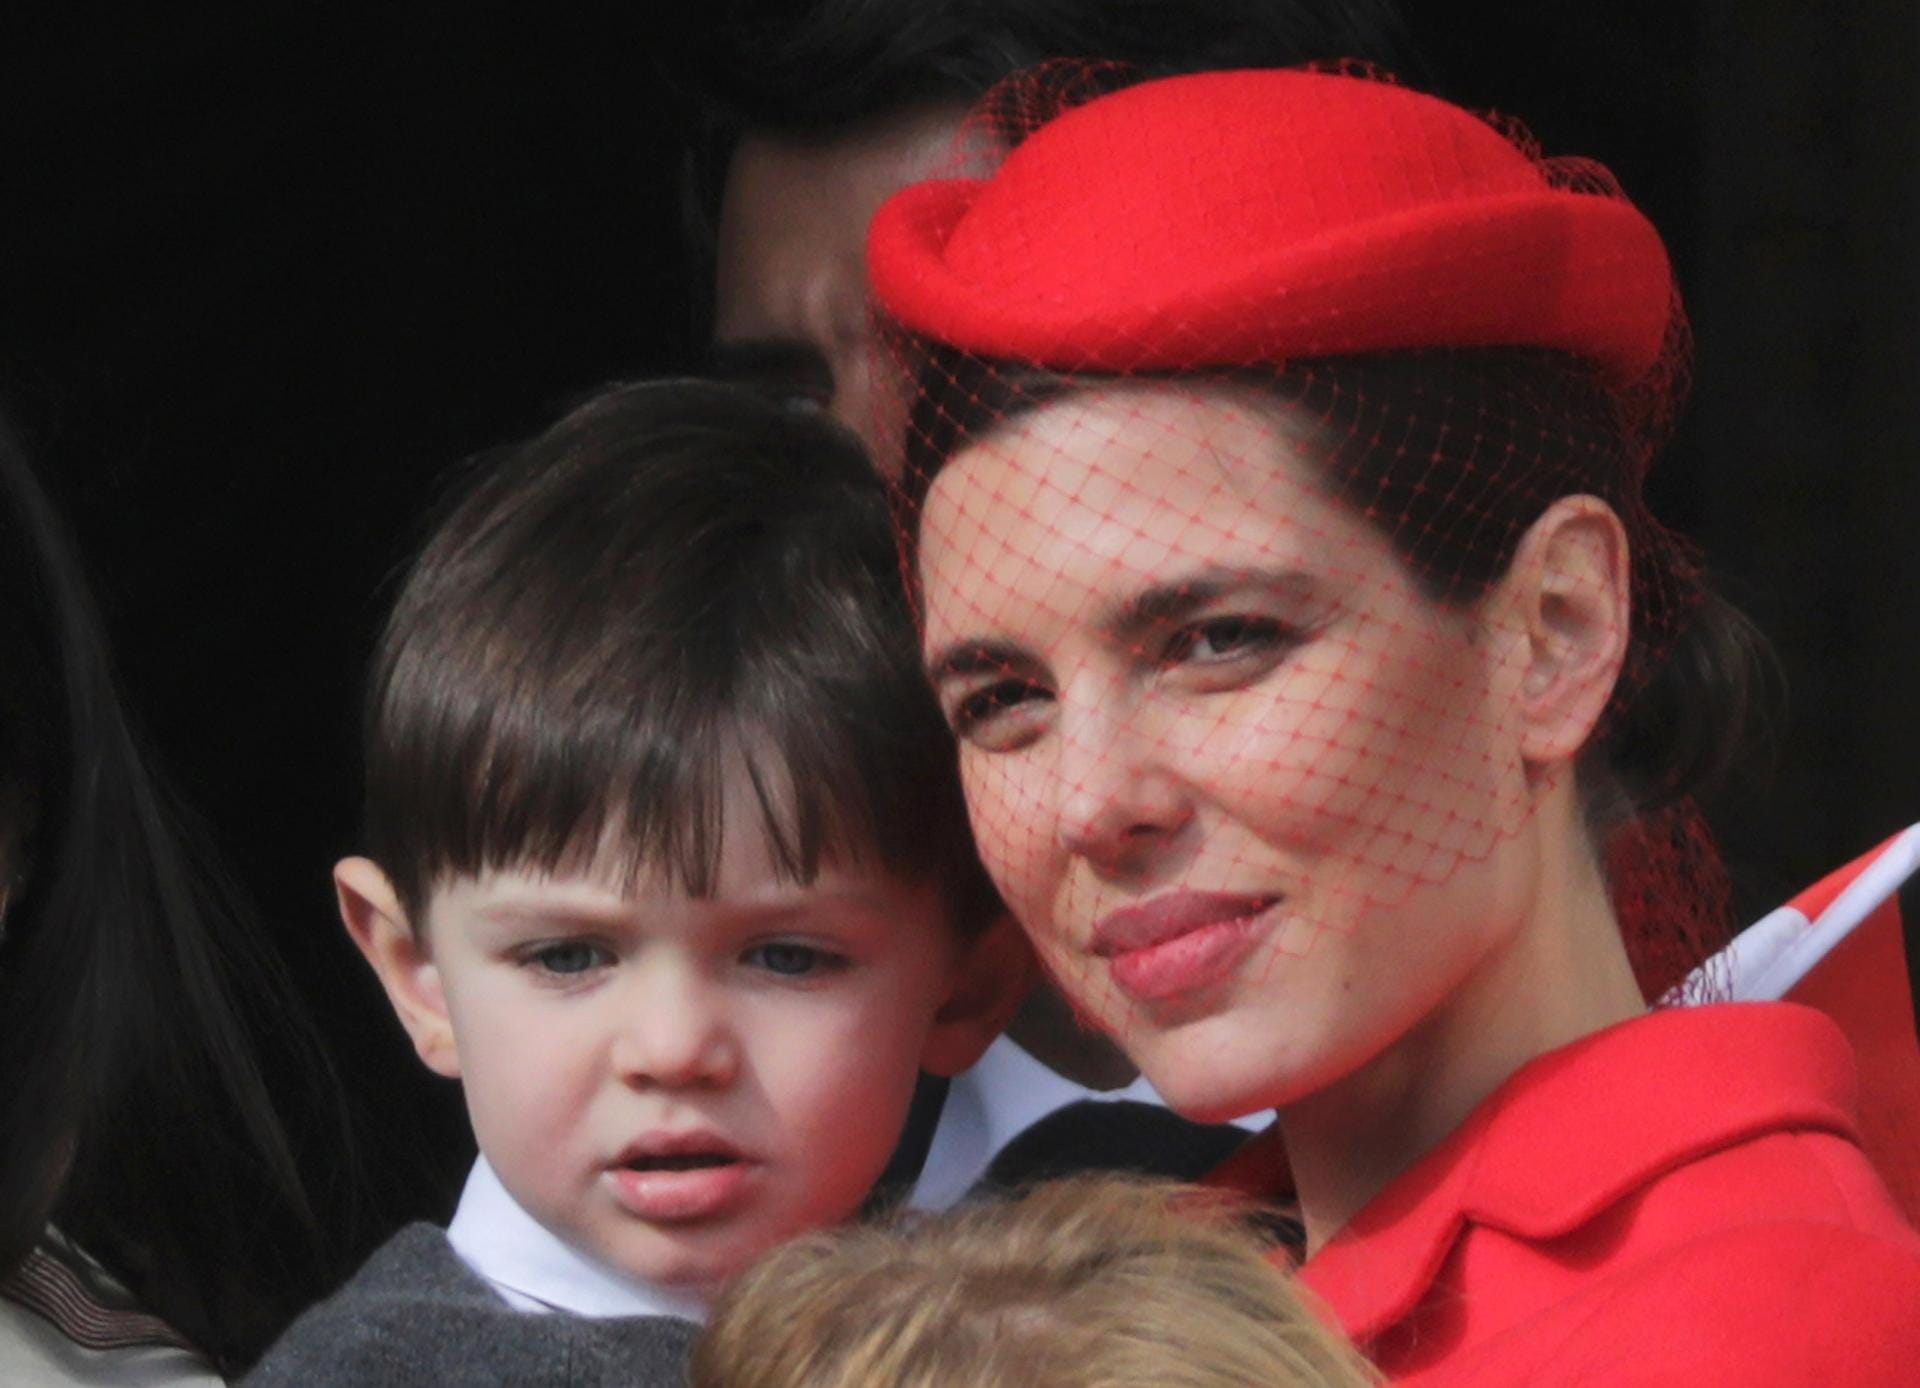 Charlotte Casiraghi and her son Raphael stand at the Palace Balcony during Monaco's National Day